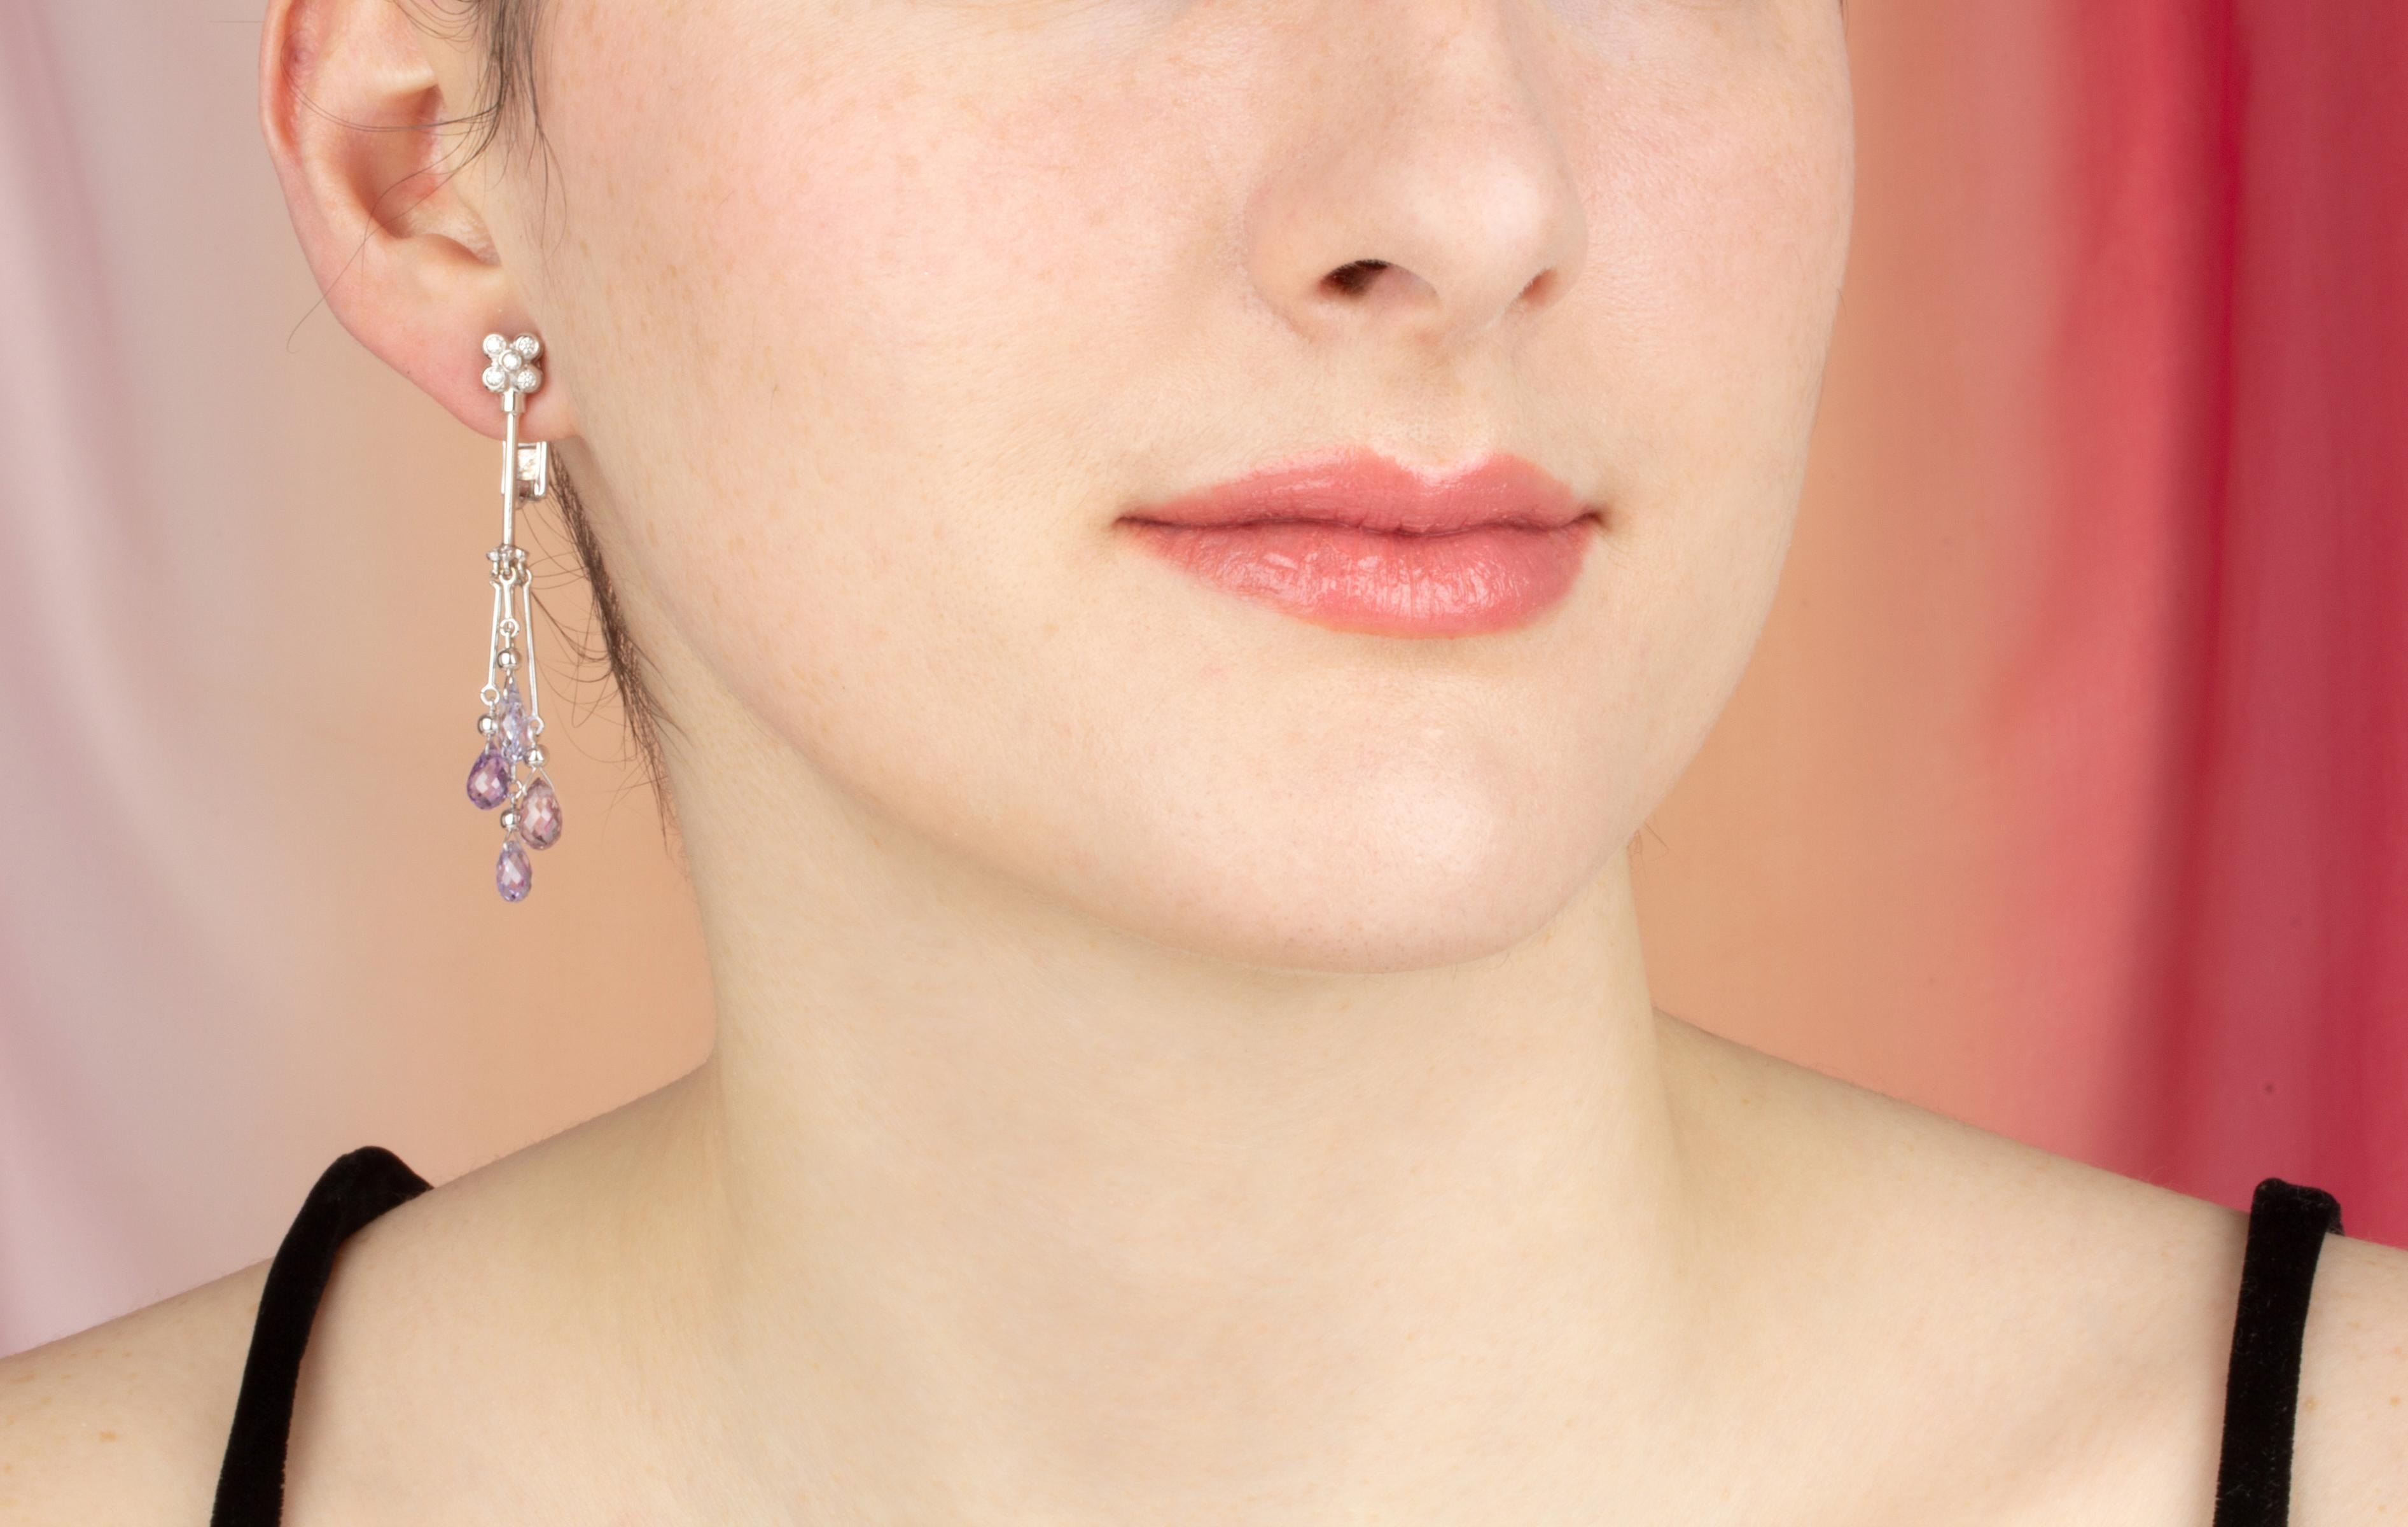 These multicolor sapphire and diamond drop earrings feature 8 briolette sapphires of lavender hues for a total of approximately 10 carats in a playful and flexible design. The earring is complete with 0.30 carats of round diamonds of top quality